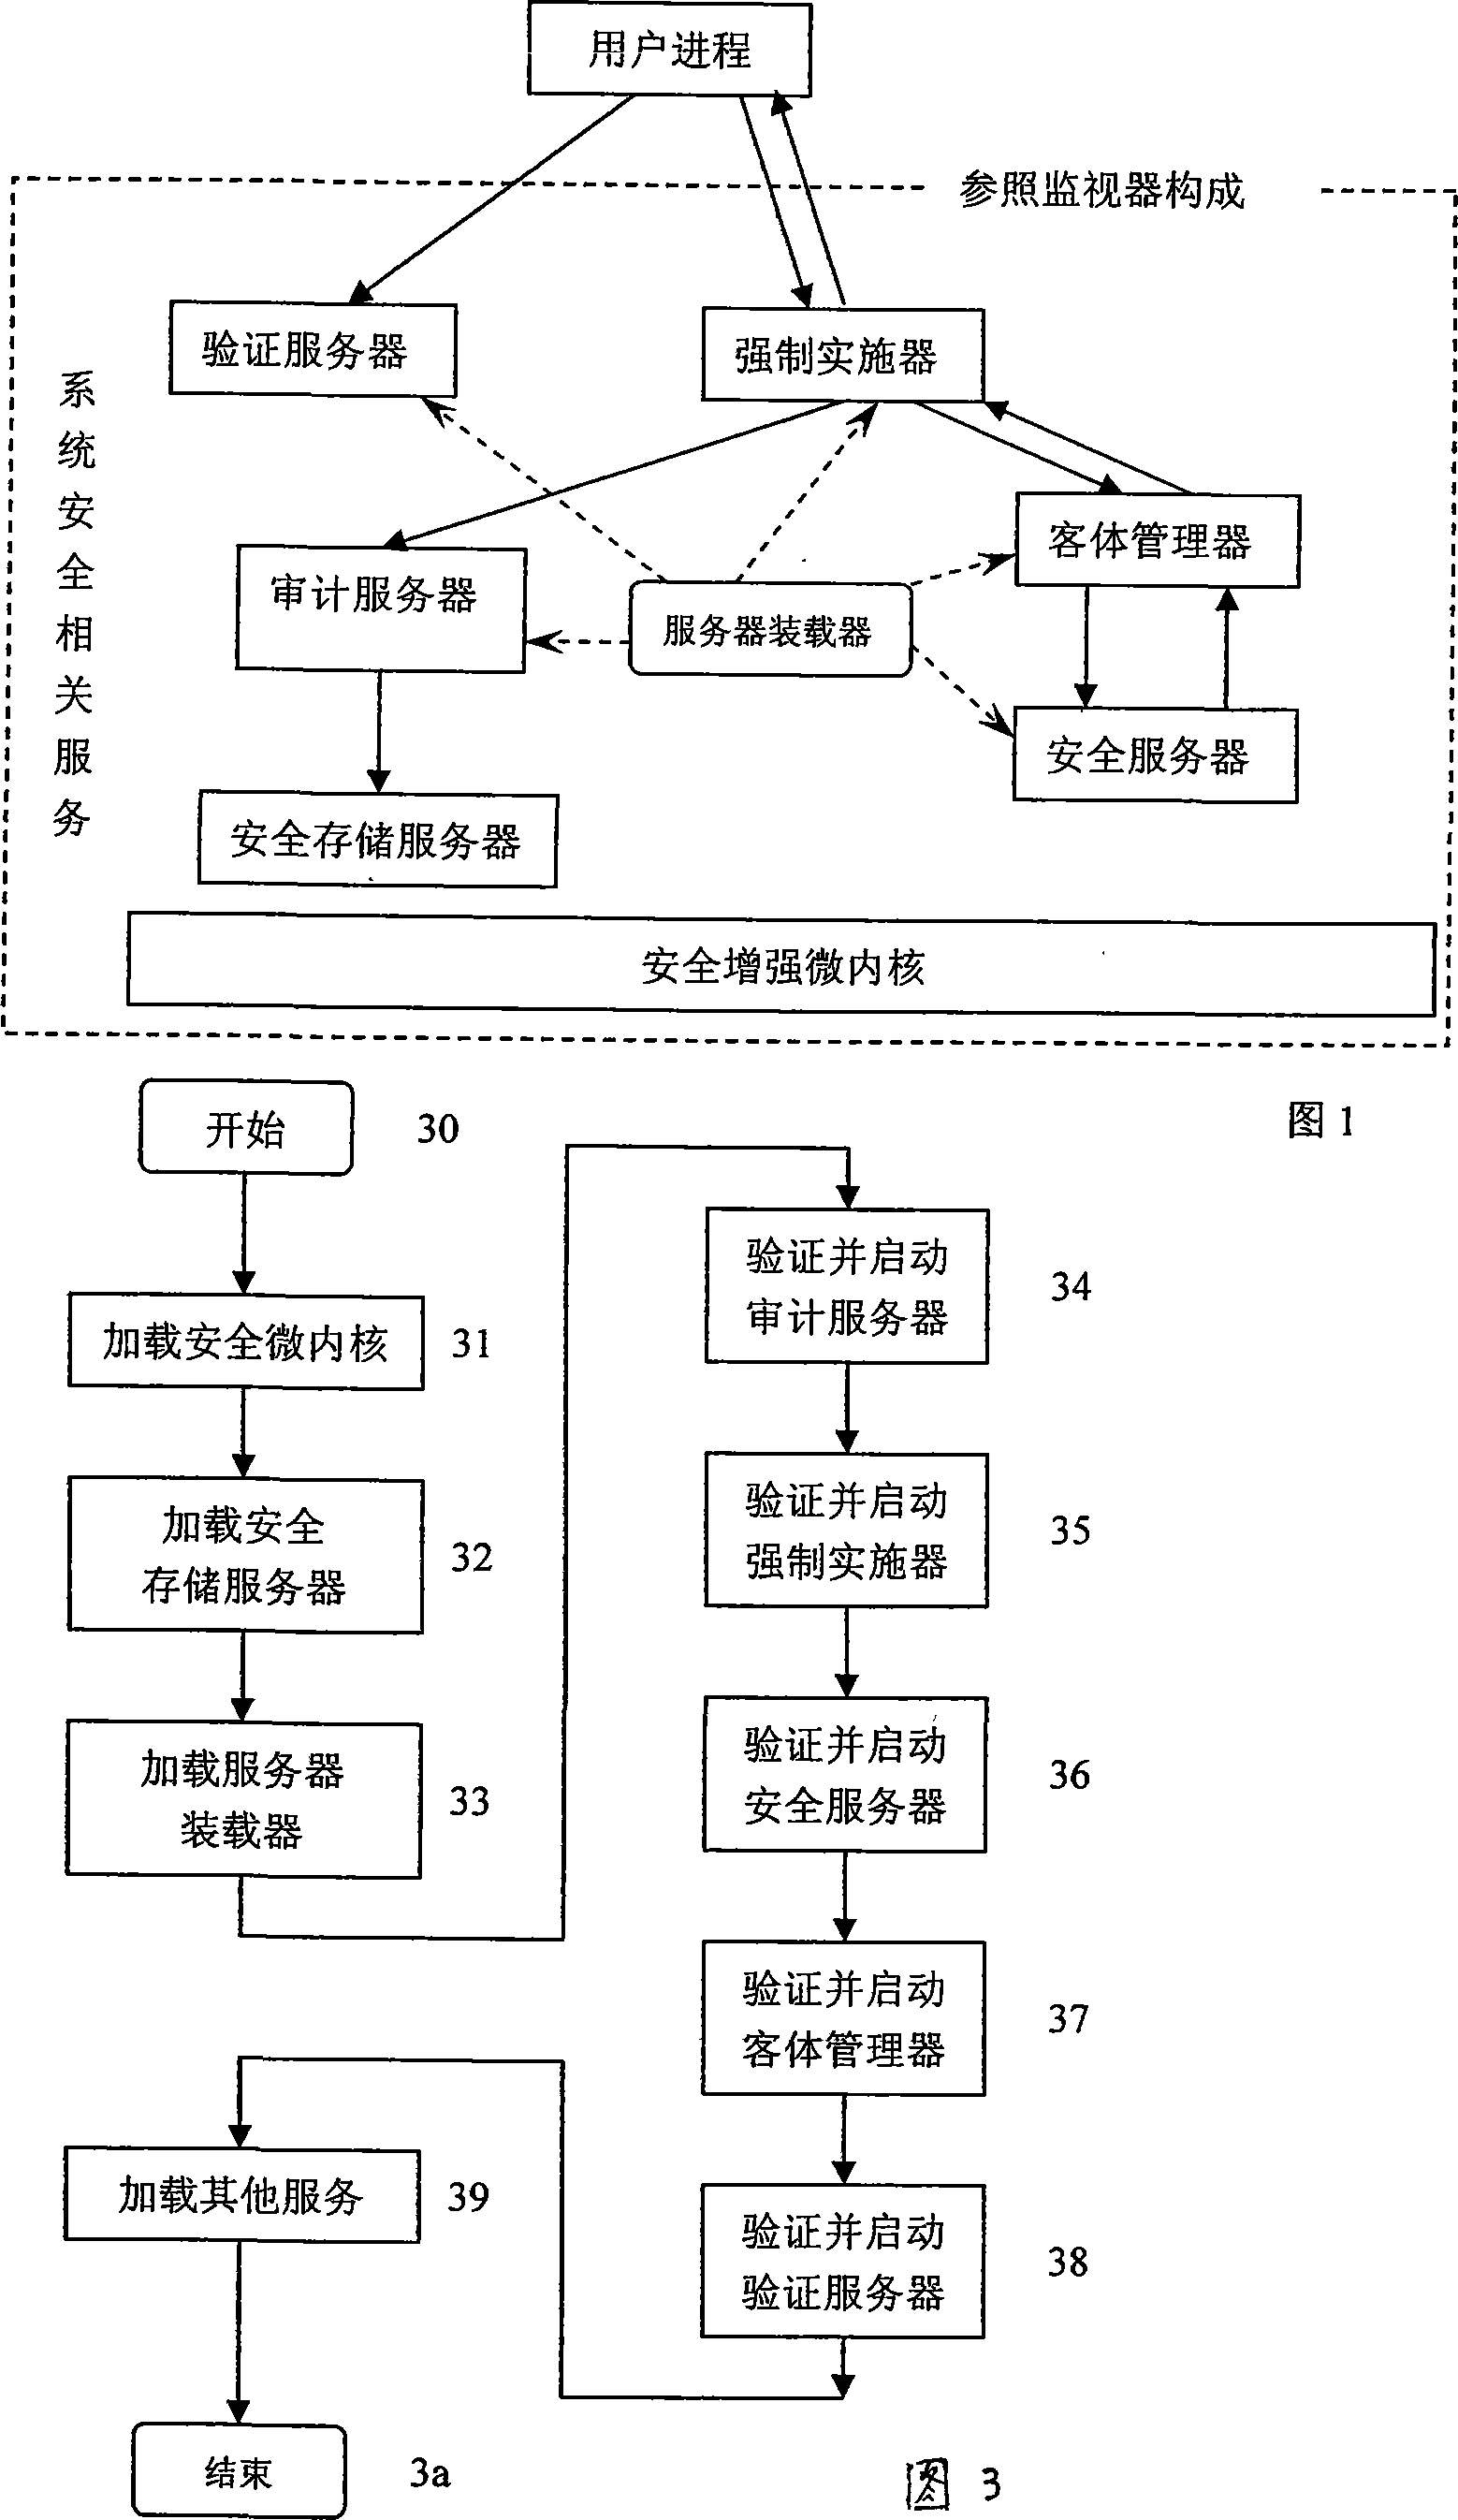 Reference monitor implementing method of high safety grade operating system